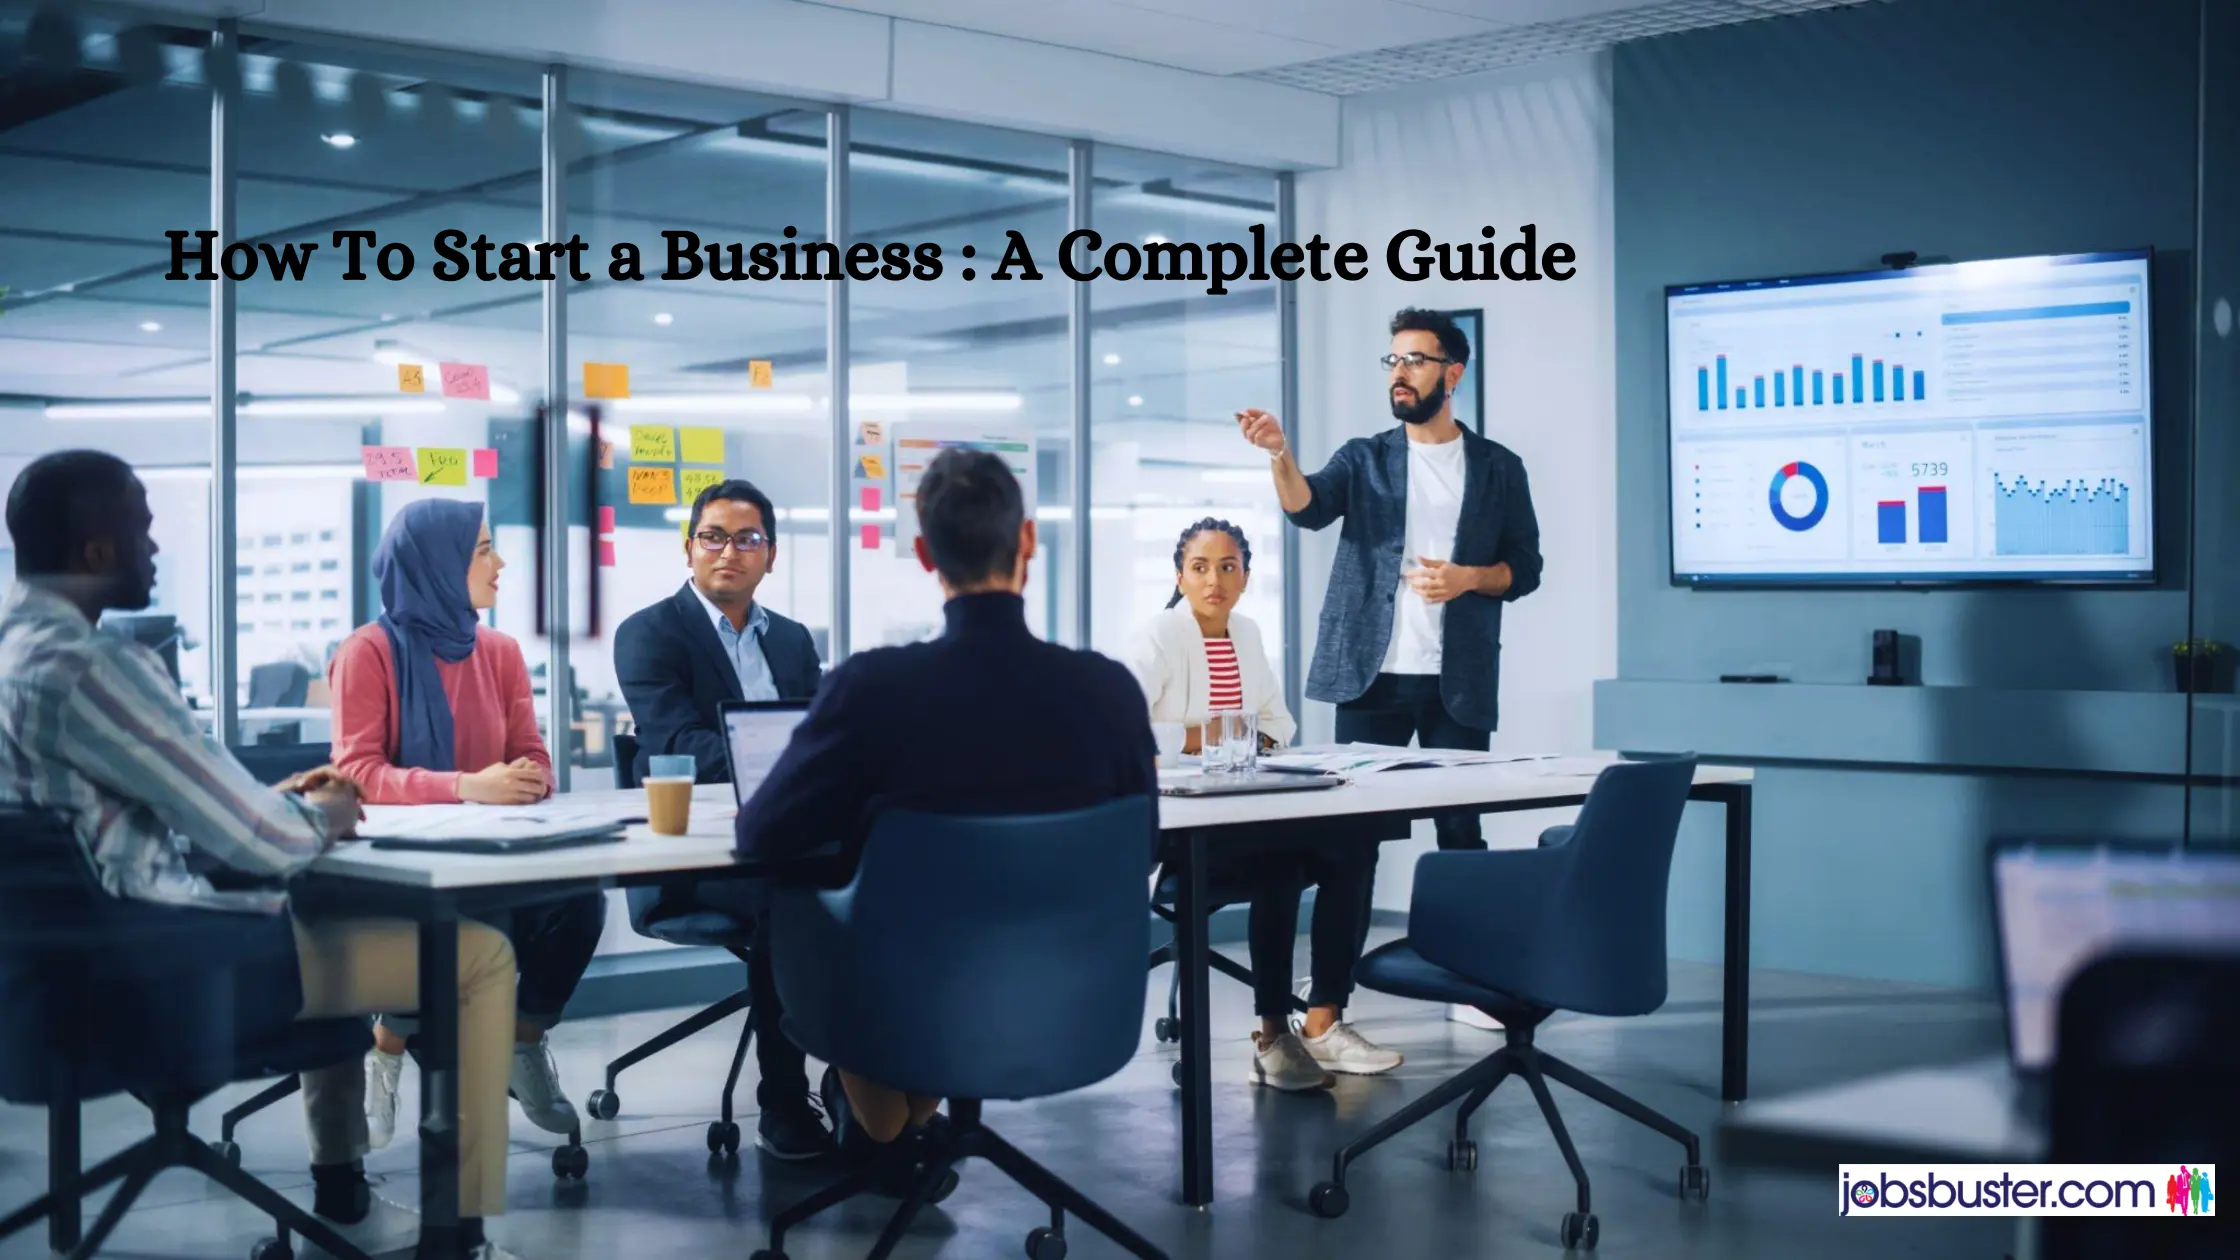 How To Start a Business: A Complete Guide